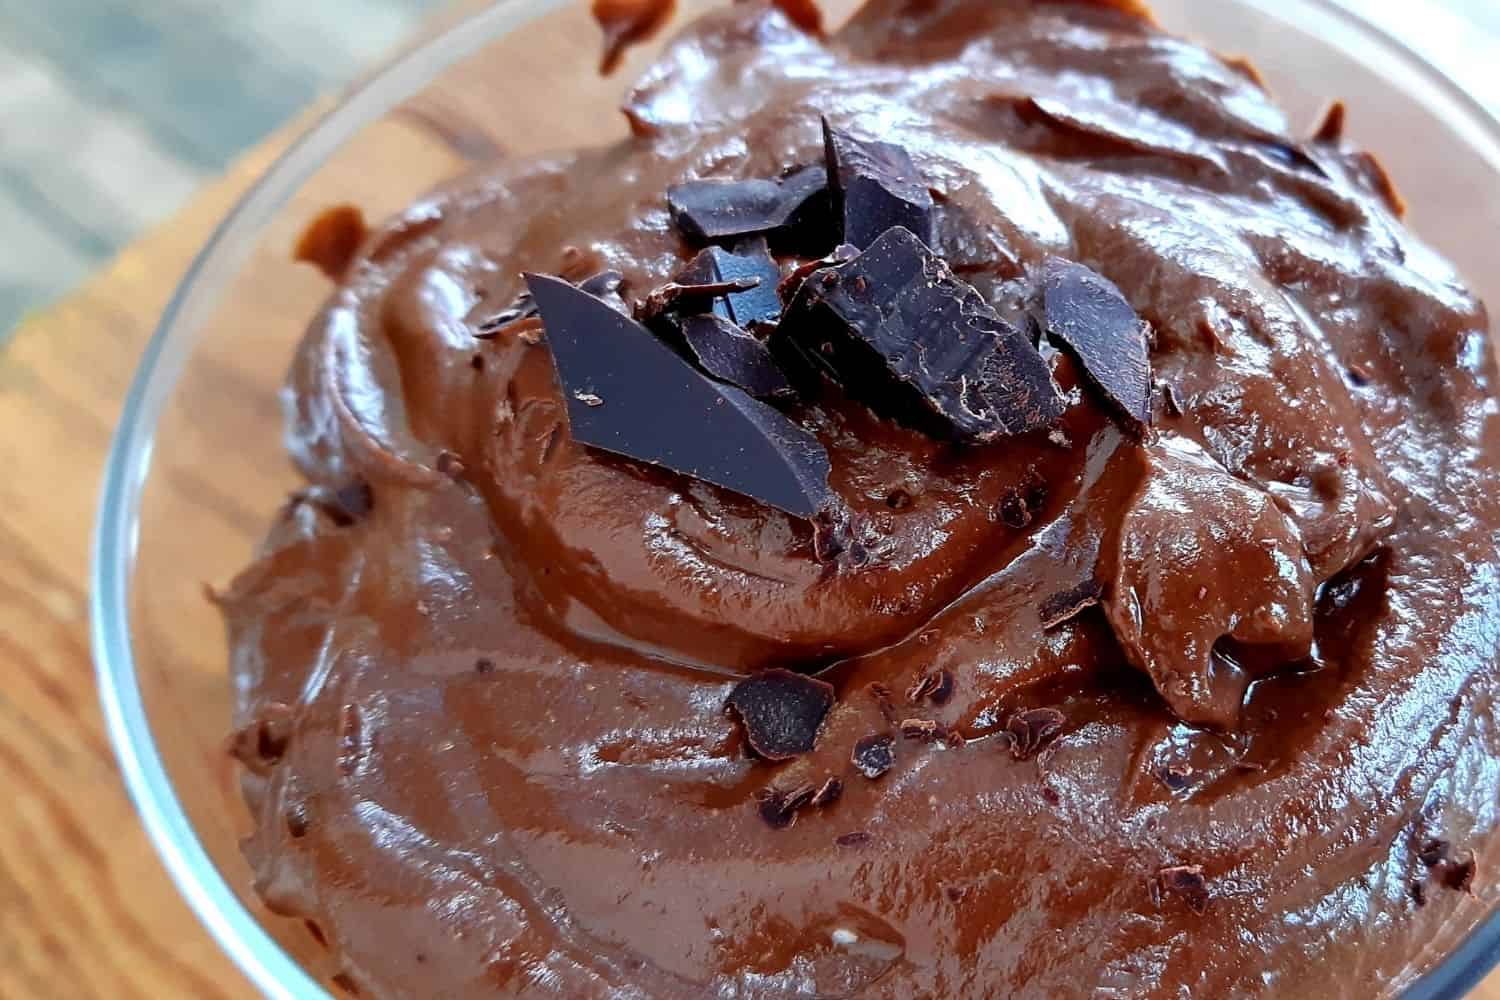 Sugar & Dairy Free, Avo and Cocoa Chocolate Mousse